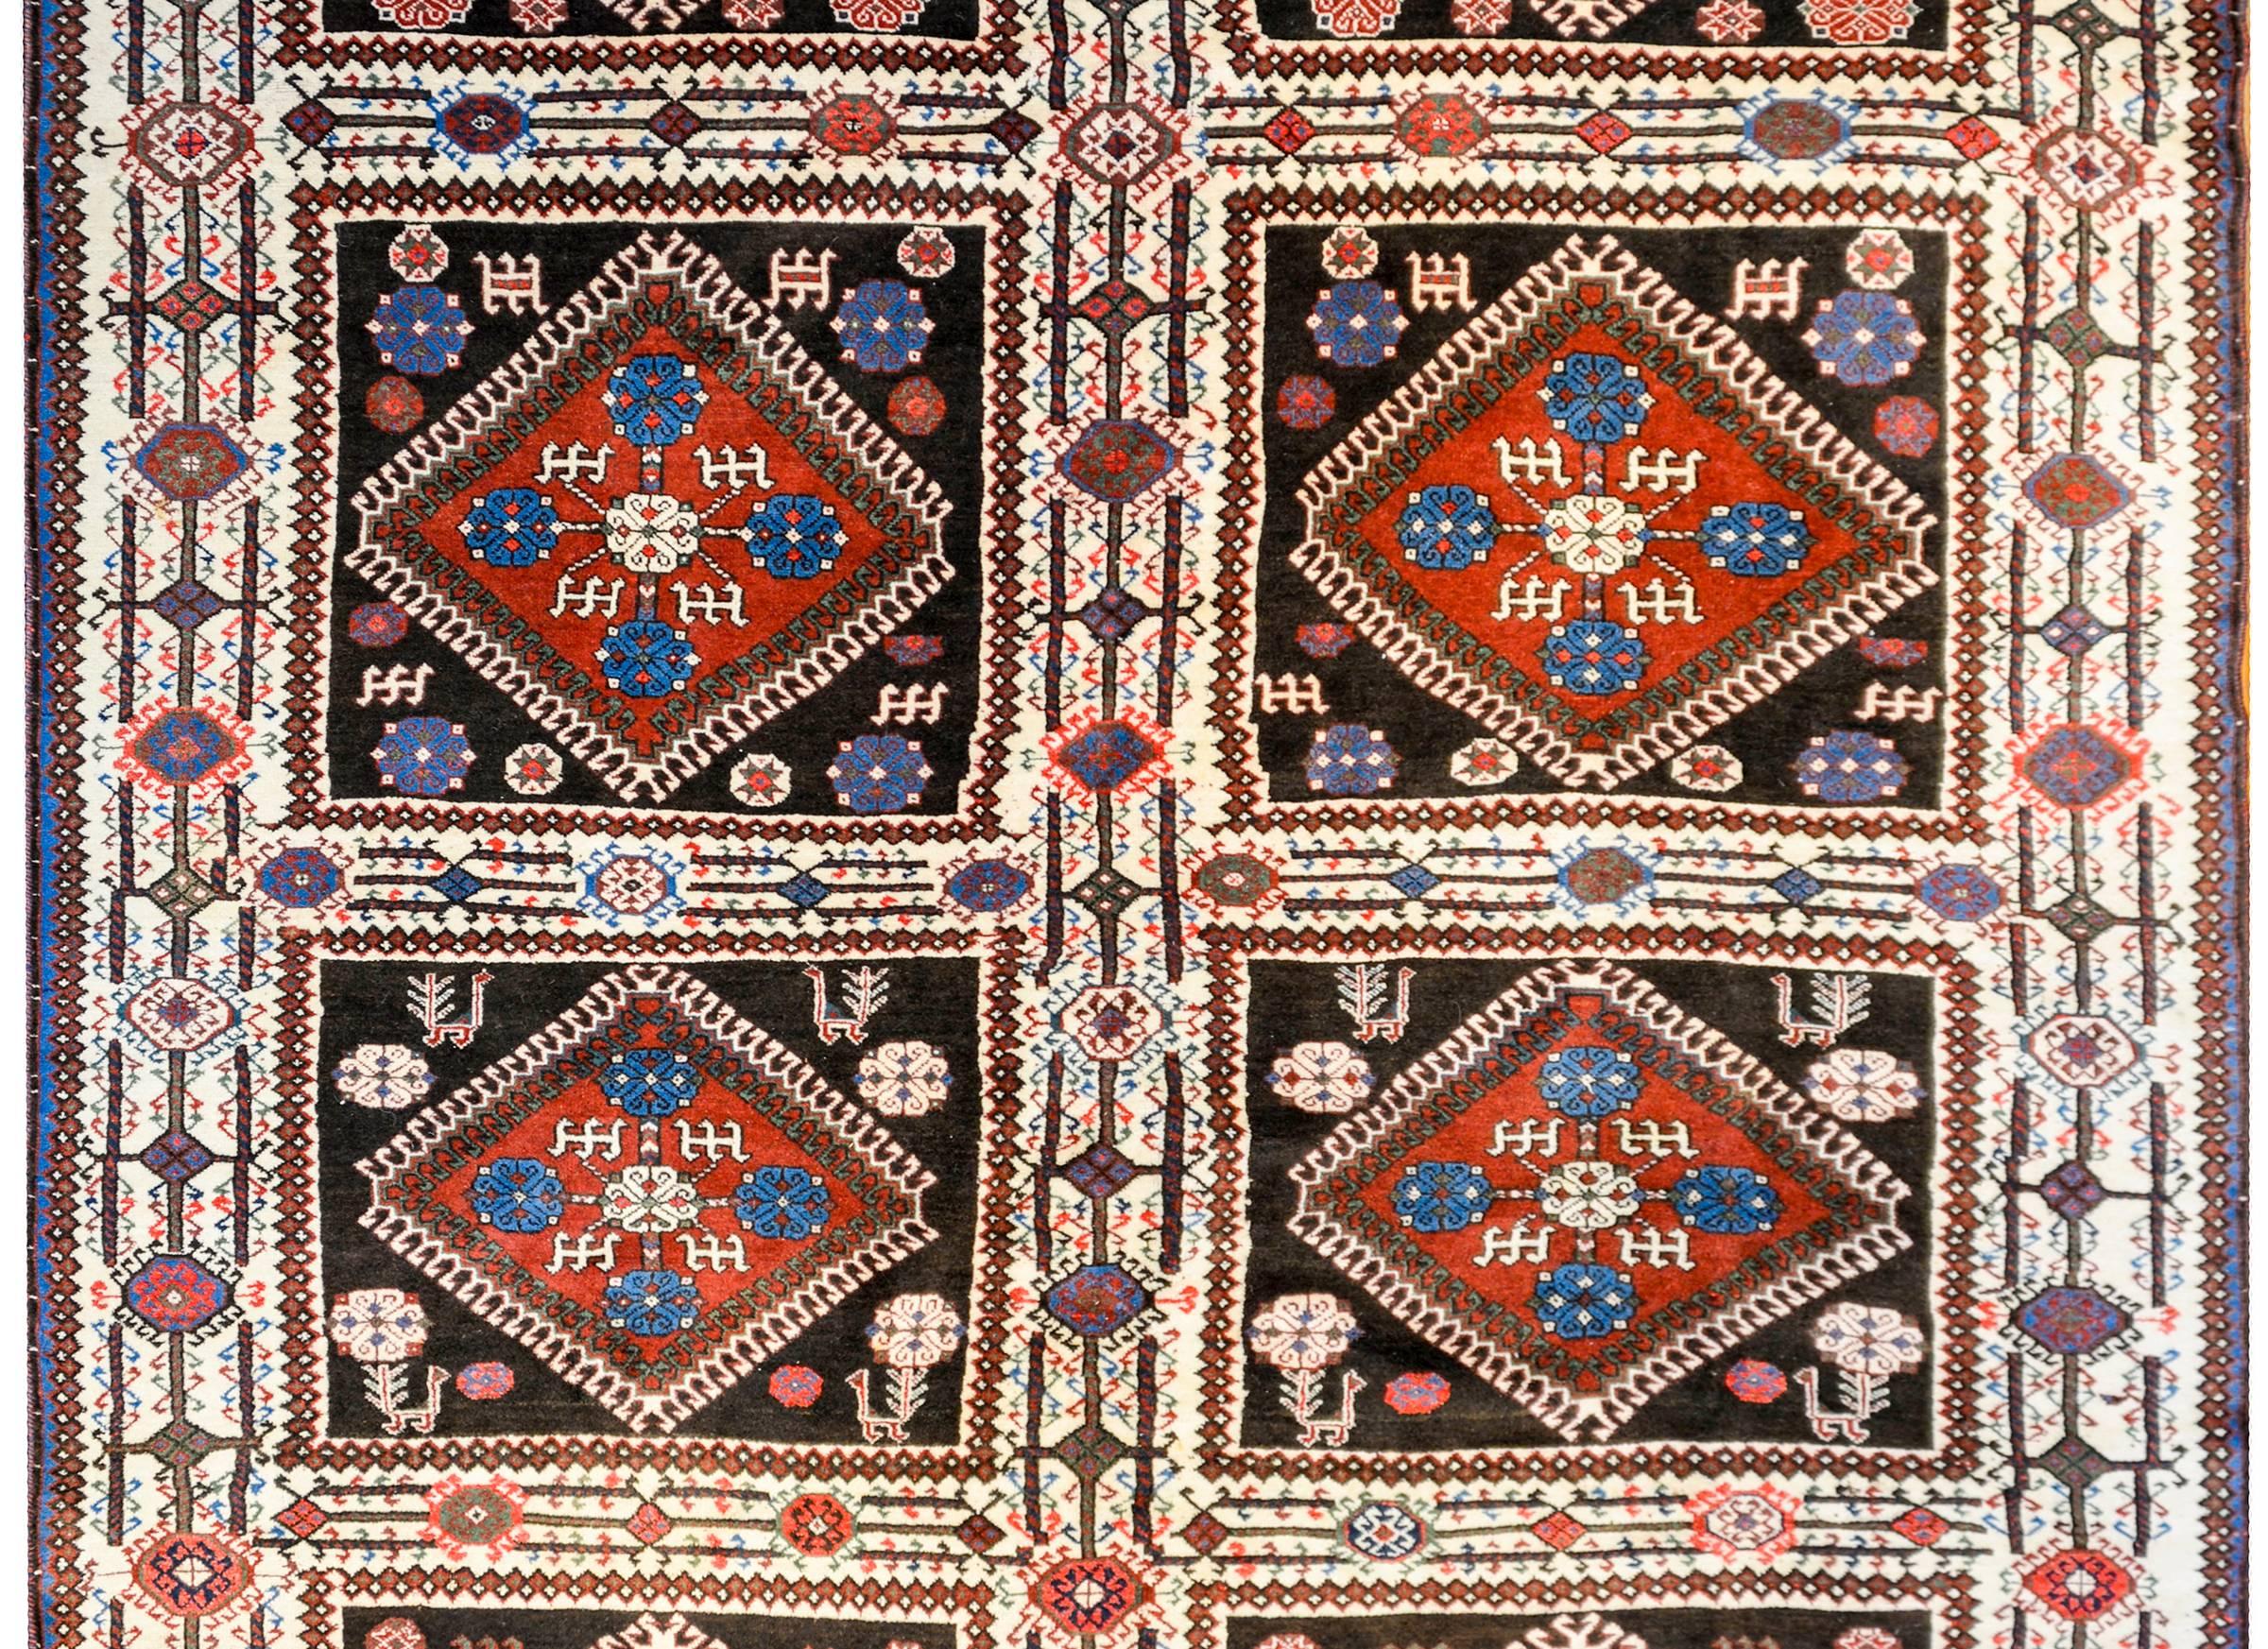 An early 20th century Persian Yalameh rug with eight multicolored geometric diamond-shaped medallions amidst fields of stylized flowers, birds, and goats on a black wool background. The borer is wide with large stylized flowers on a white background.